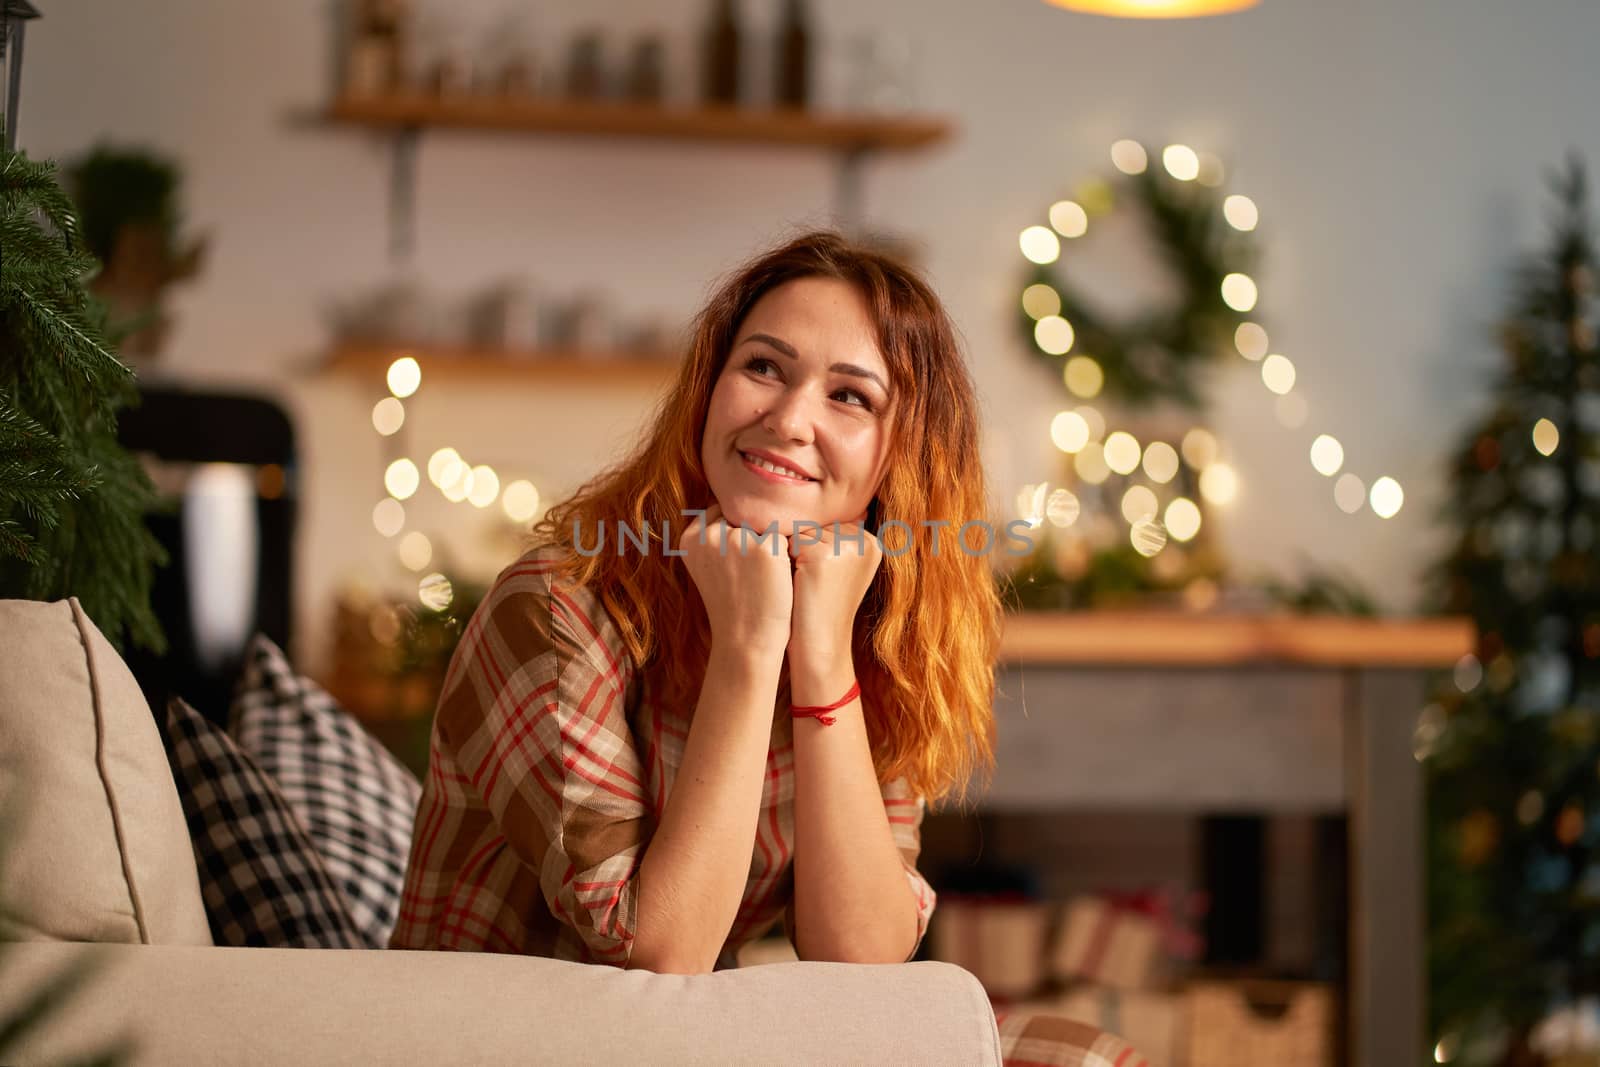 A lovely redhead girl with a mysterious smile makes plans for the new year.